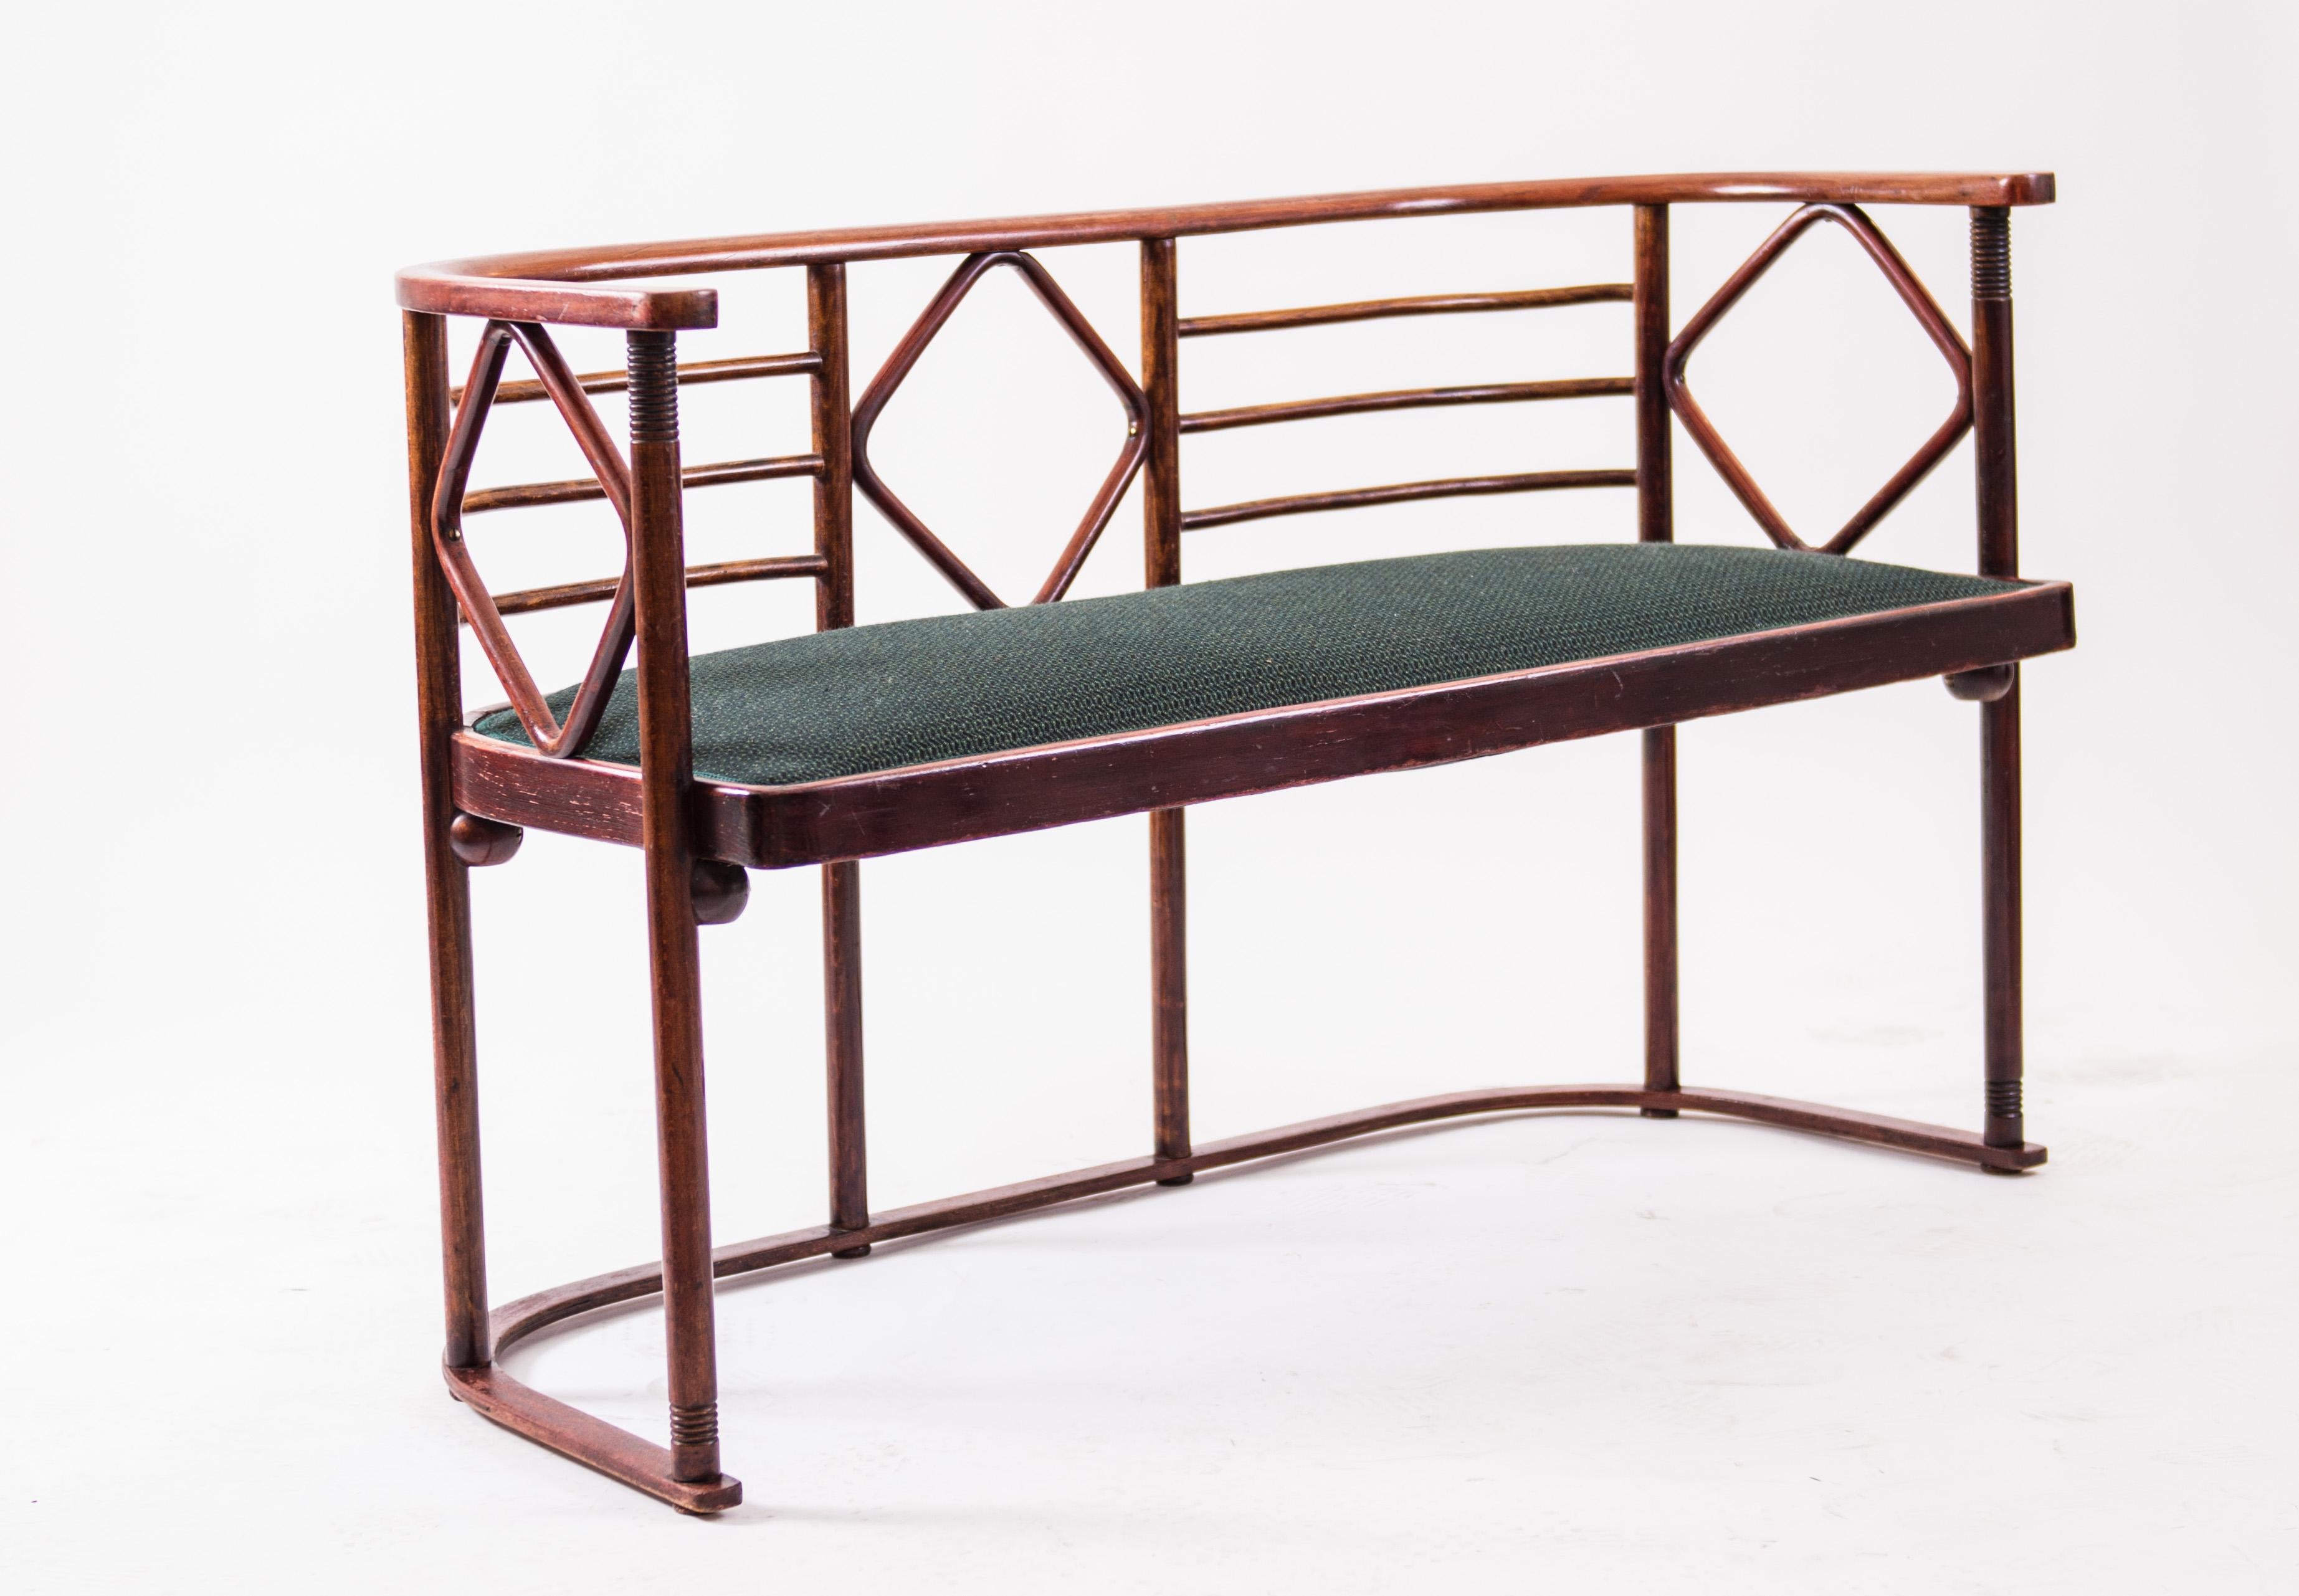 An extraordinary modern design from 1905, the time when Josef Hoffmann was on the zenith of his creativity, consisting of, two armchairs and a settee, beech bentwood, brown-stained, with polished finish, decorated with straight and rhomb-shaped